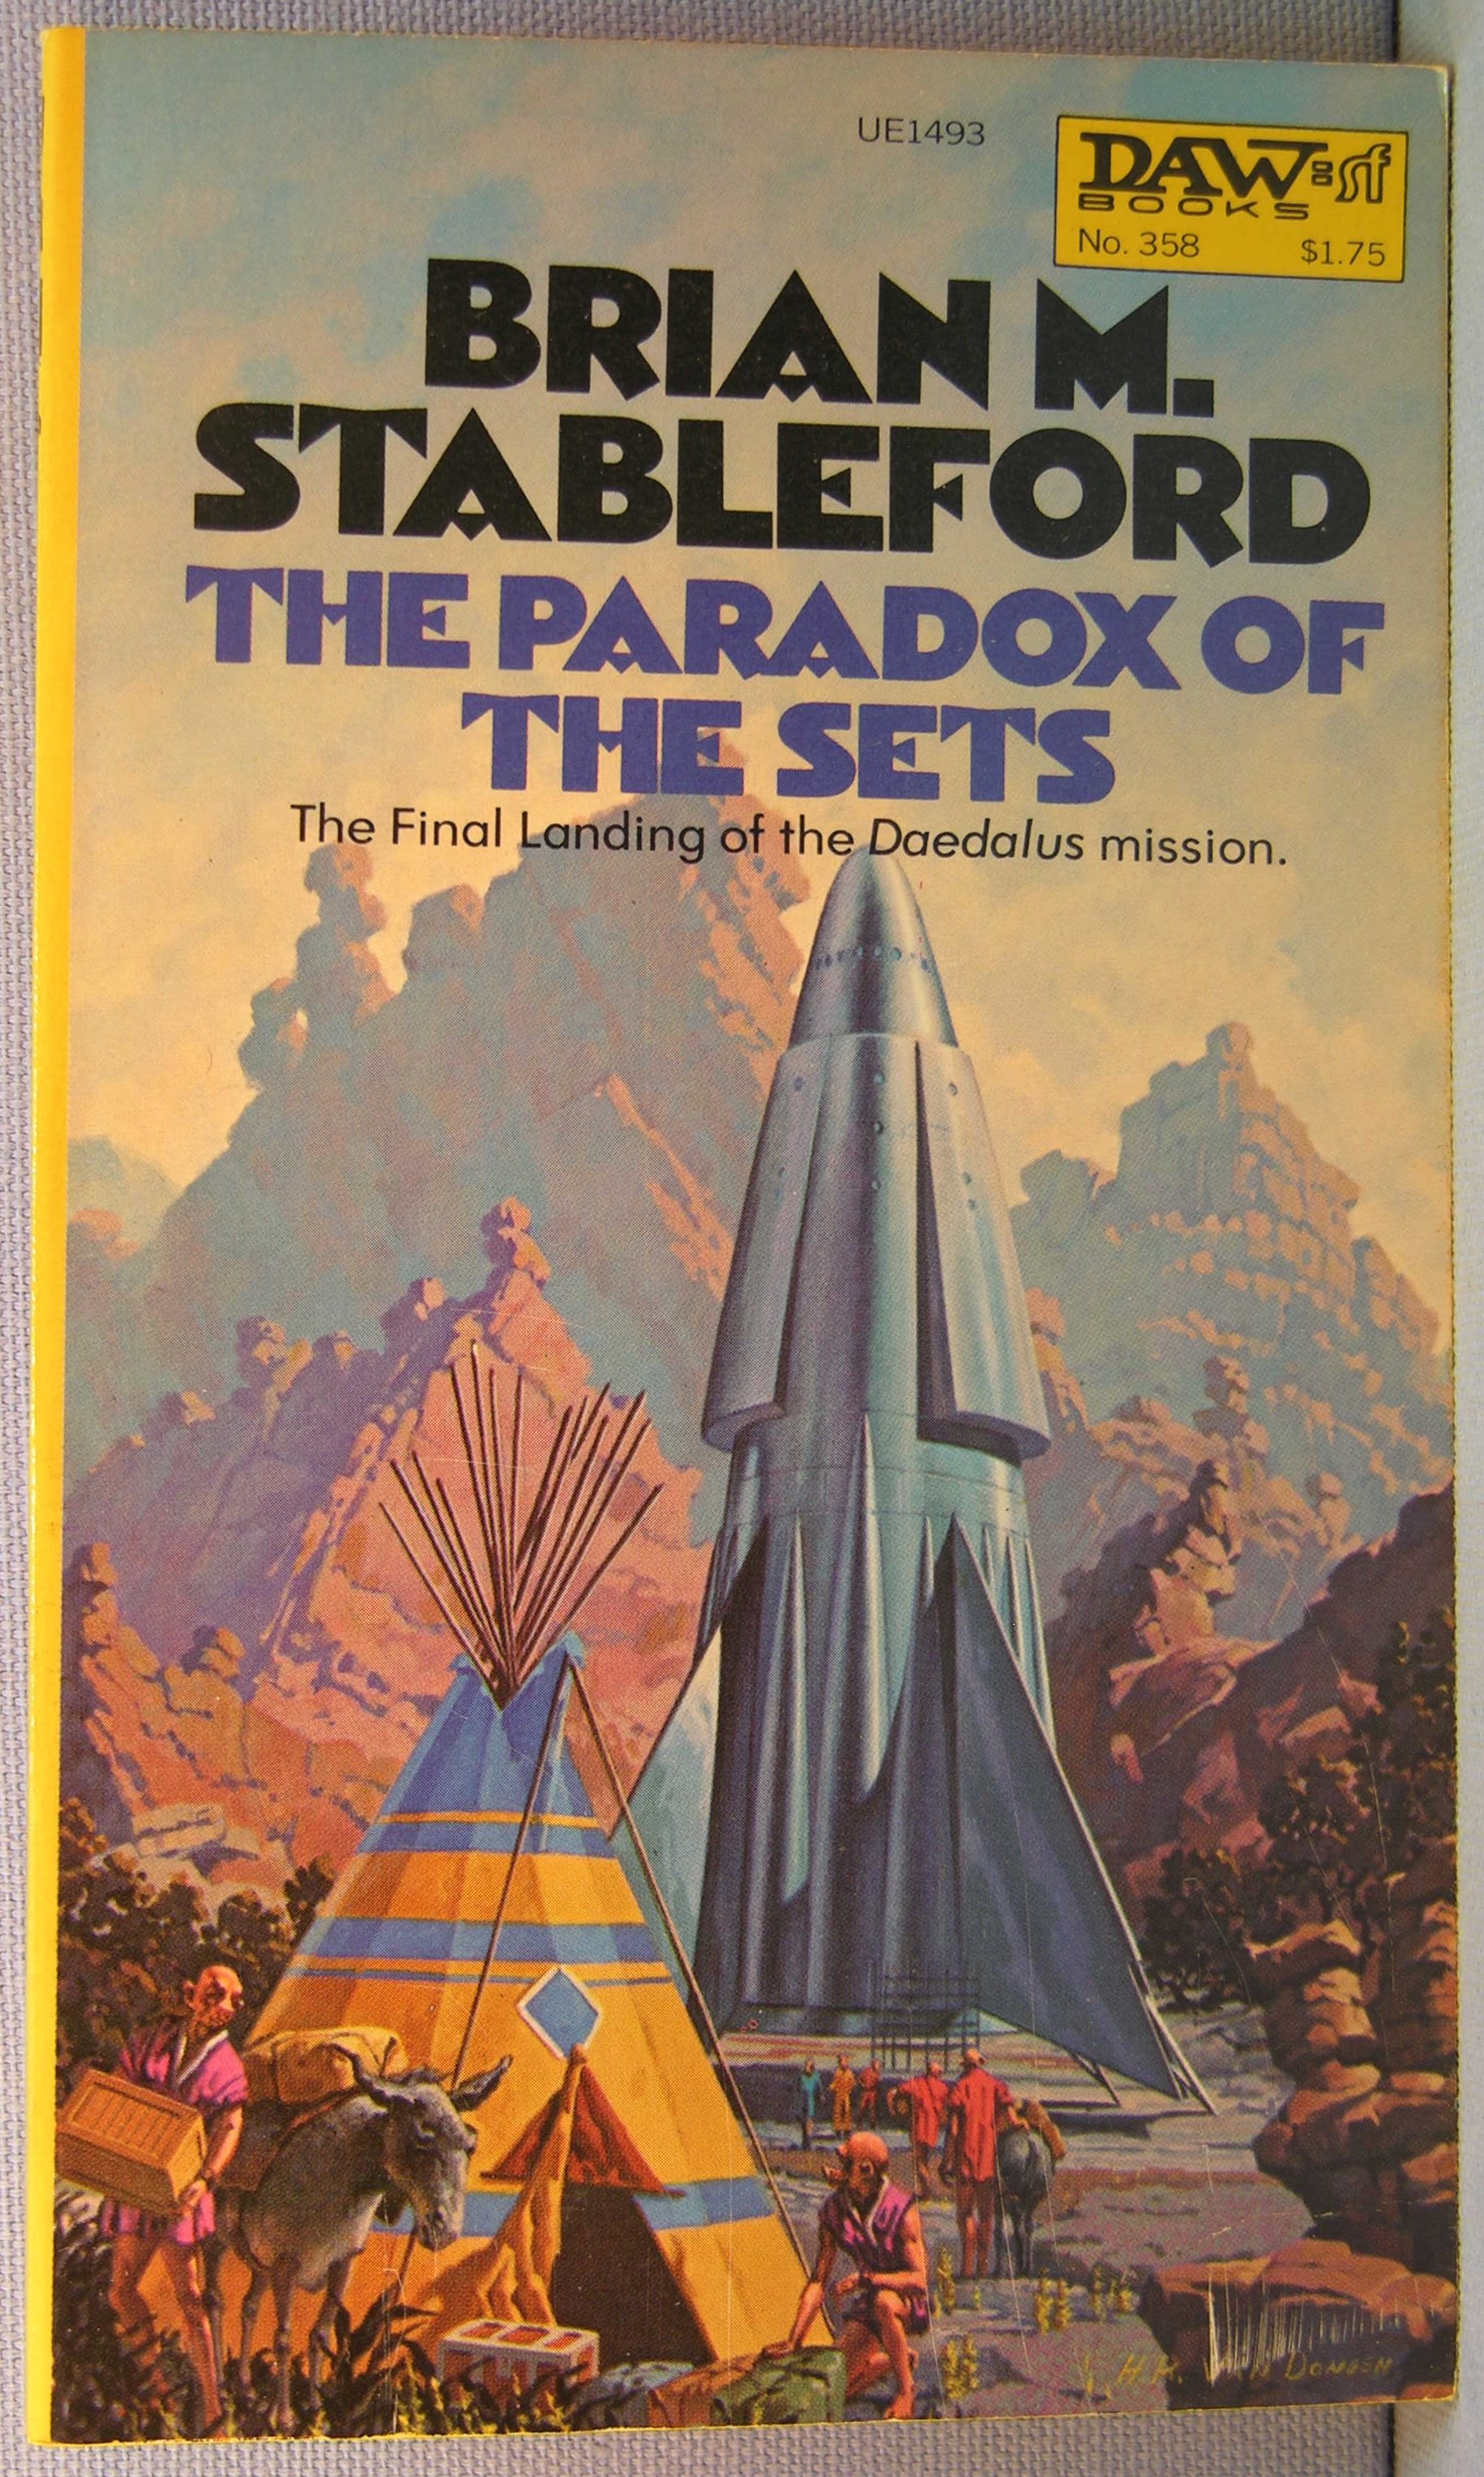 The Paradox of the Sets [Daedalus Mission #6] - Brian M. Stableford